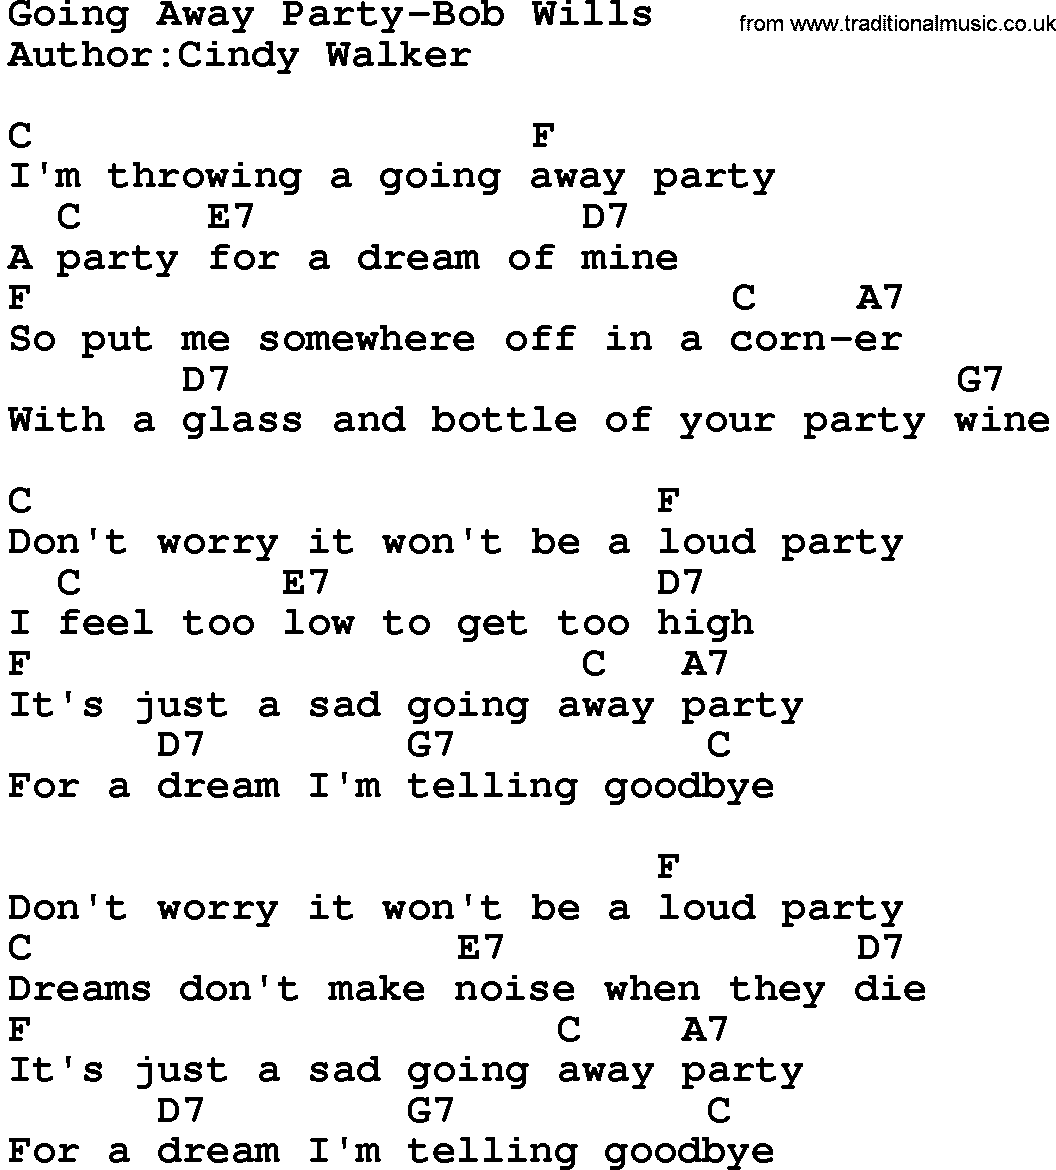 Country music song: Going Away Party-Bob Wills lyrics and chords